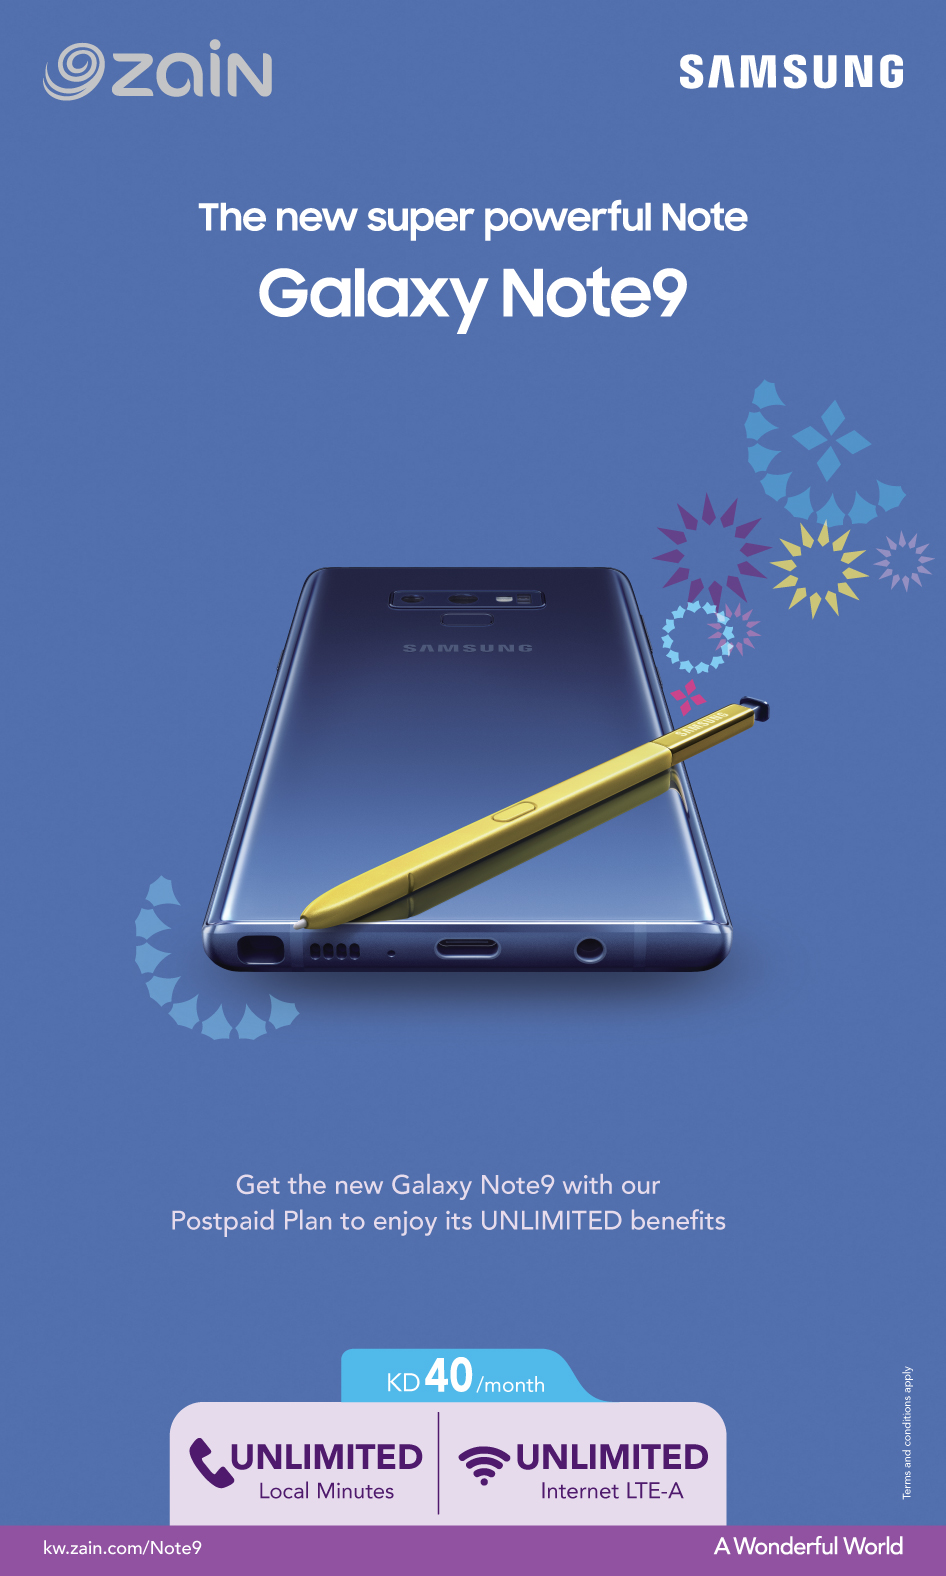 Zain offers the all-new Samsung Galaxy Note9 